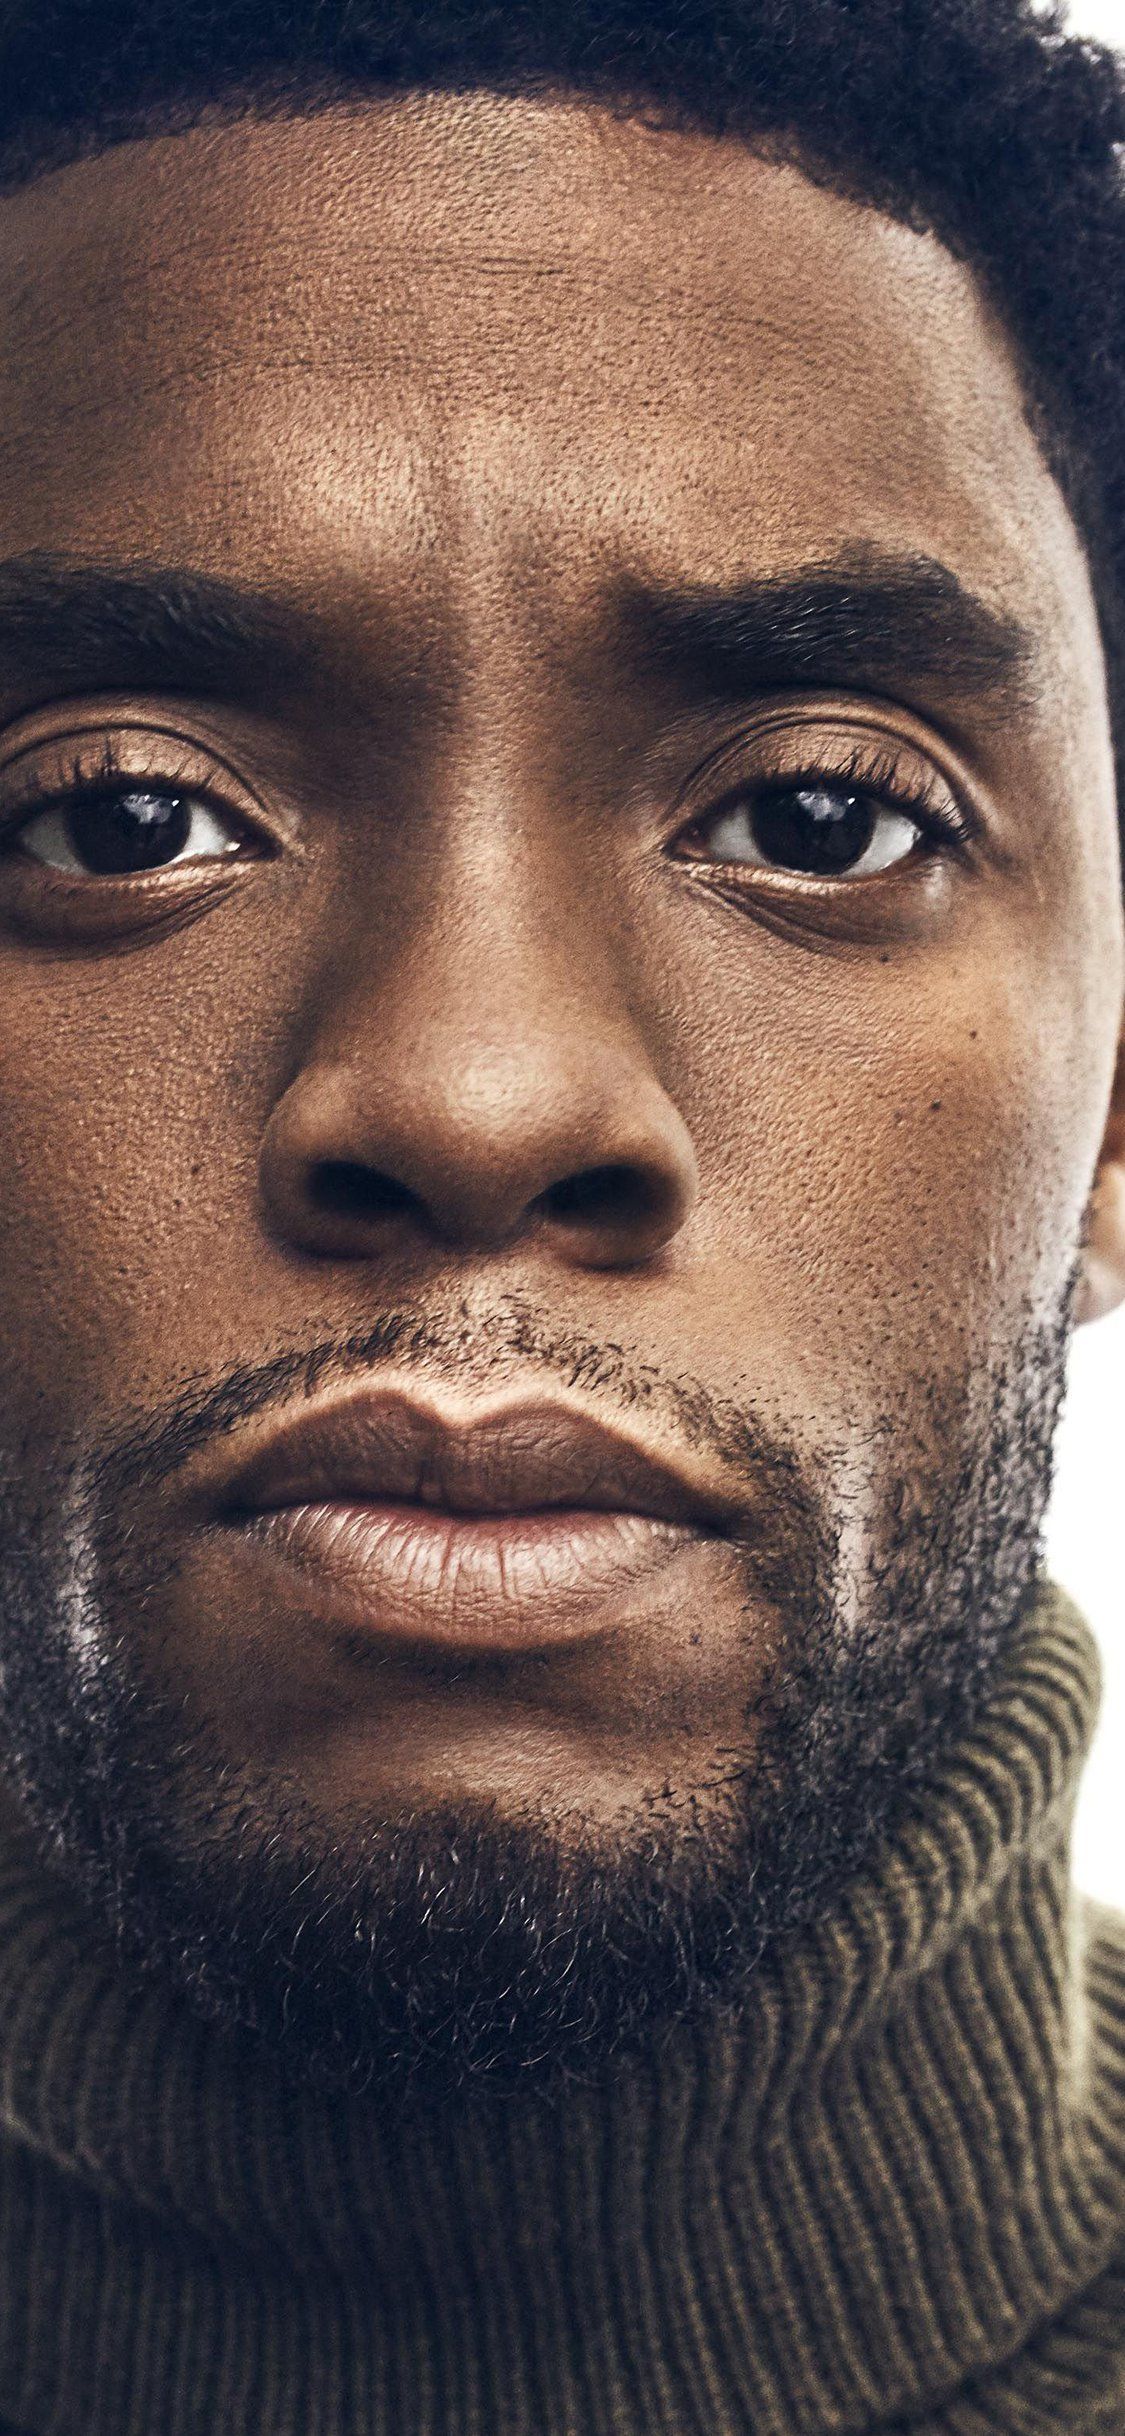 Download iPhone X .Chadwick Boseman, Close up, Black Panther. HD Wallpaper, Movies Wallpaper for Phone & Desktop Background Collections. Black panther chadwick boseman, Movie wallpaper, Black panther